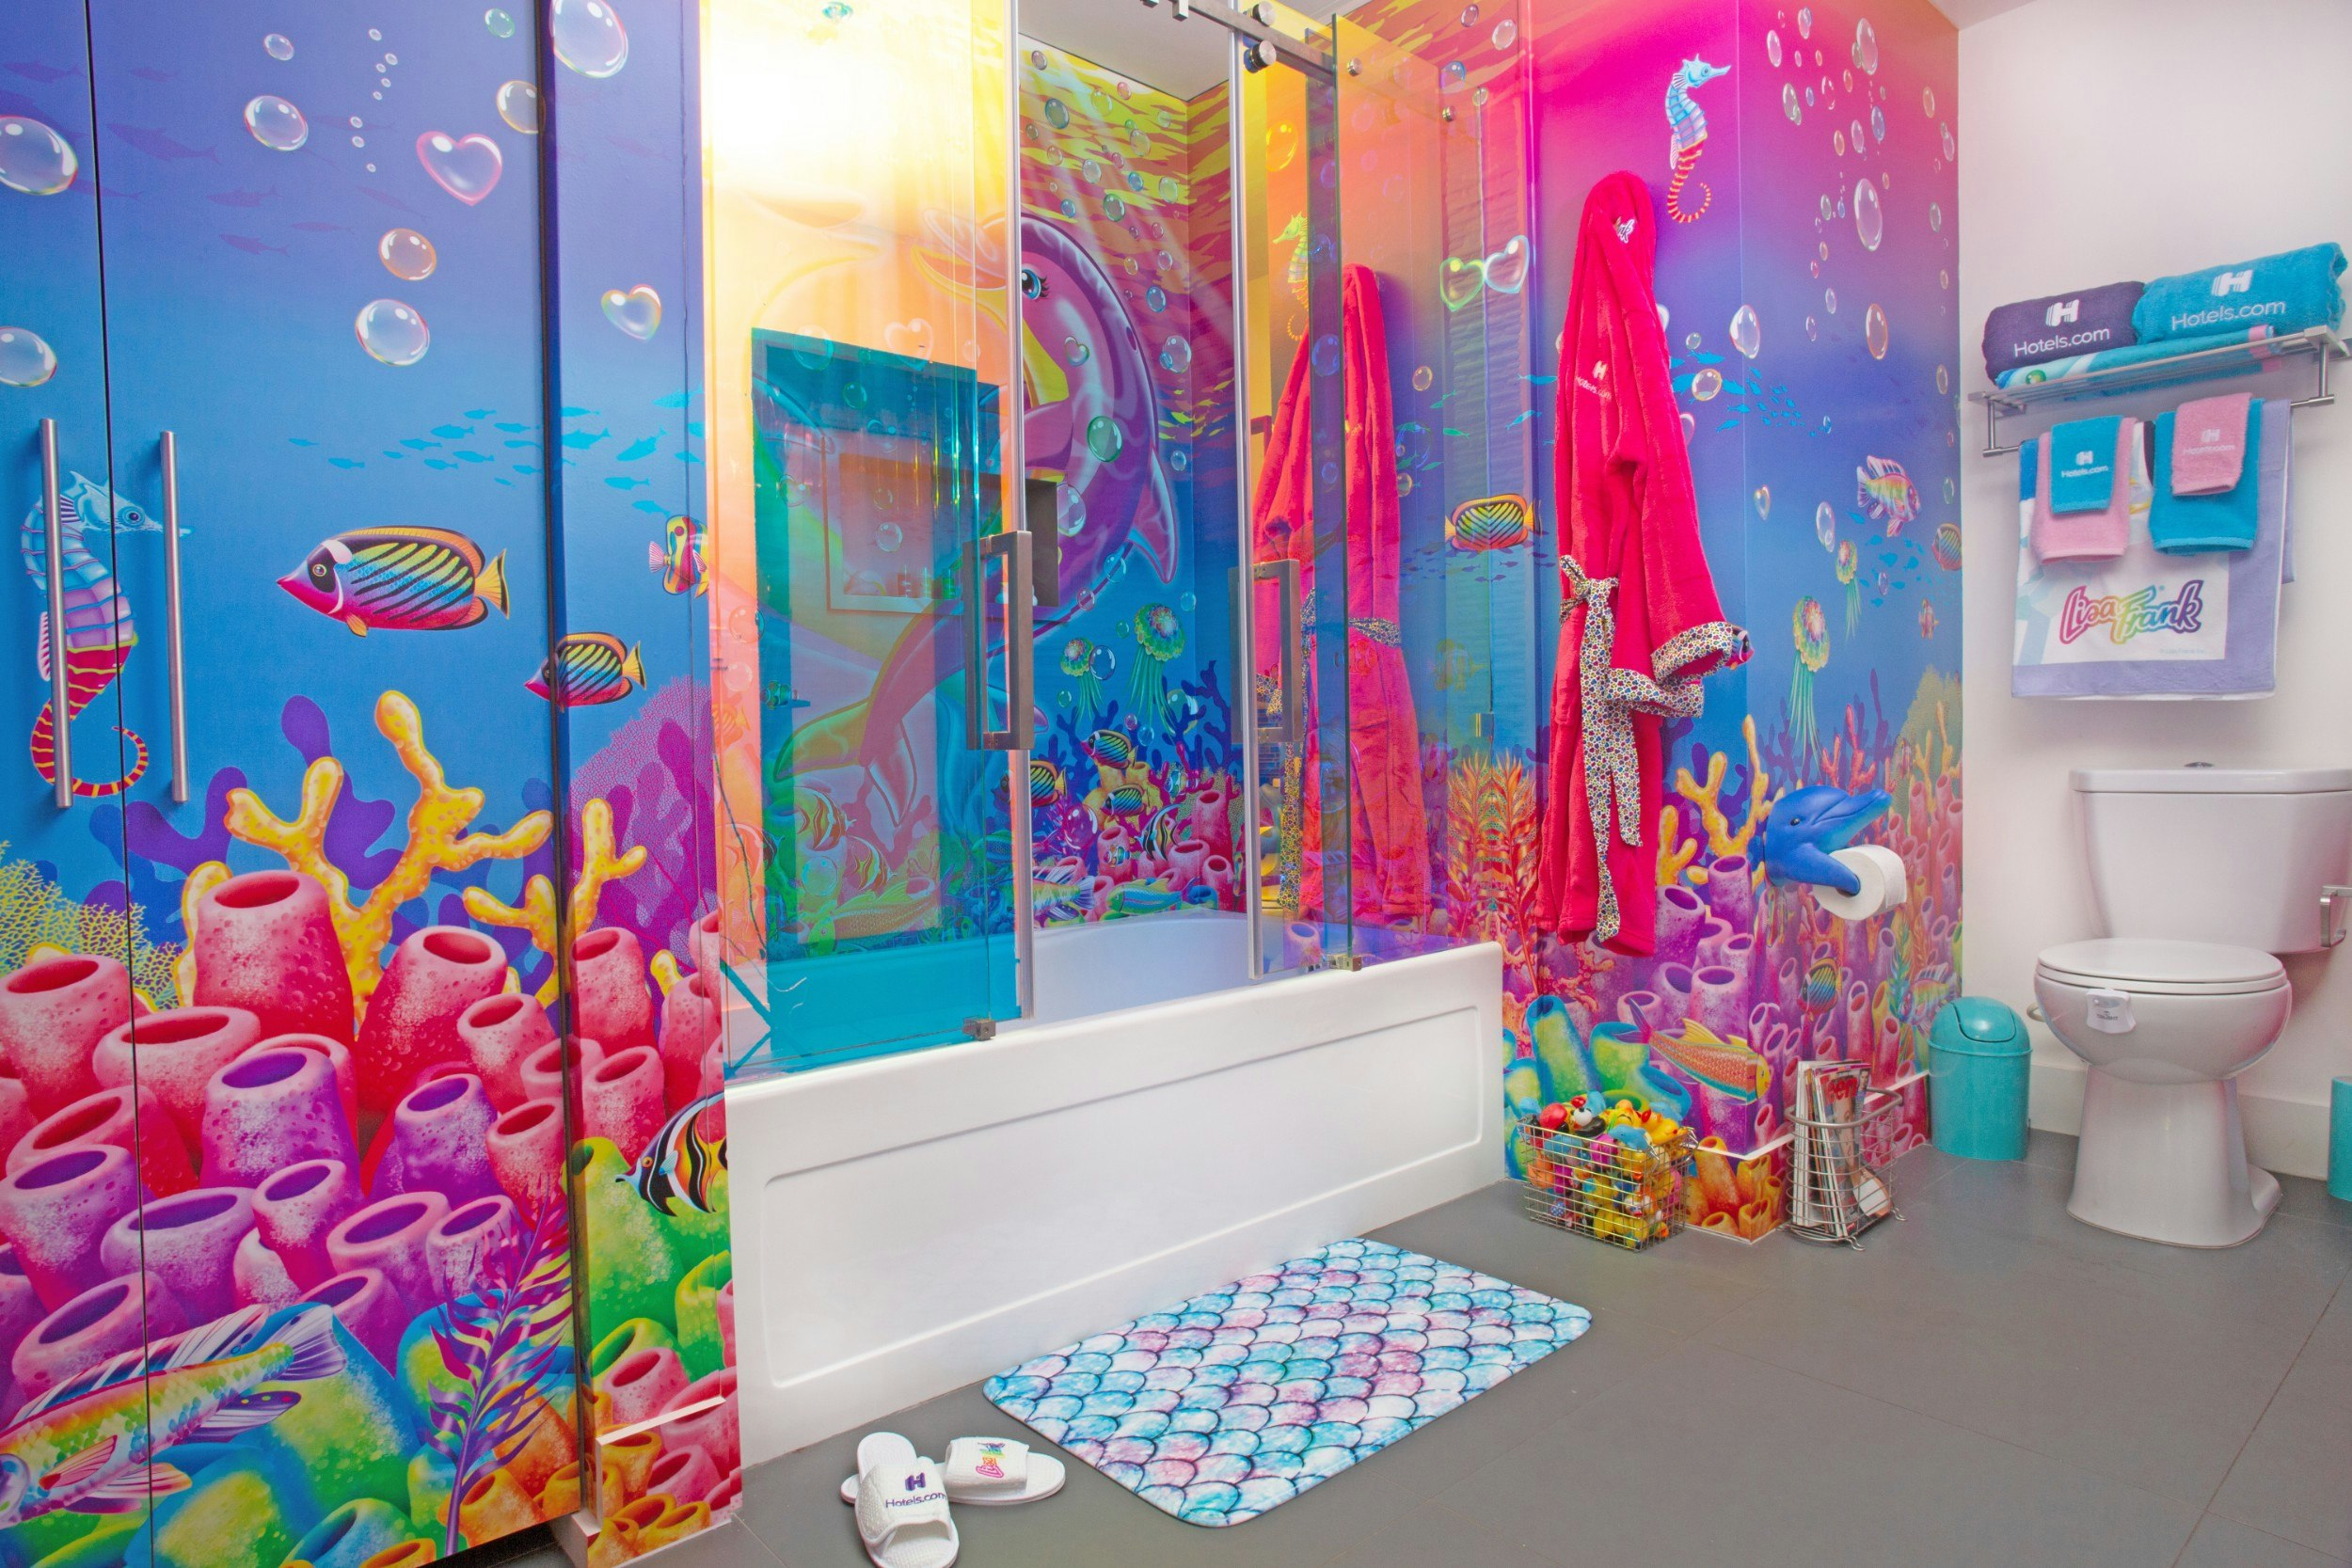 The colourful bathroom at the Lisa Frank Flat complete with pink bathrobe